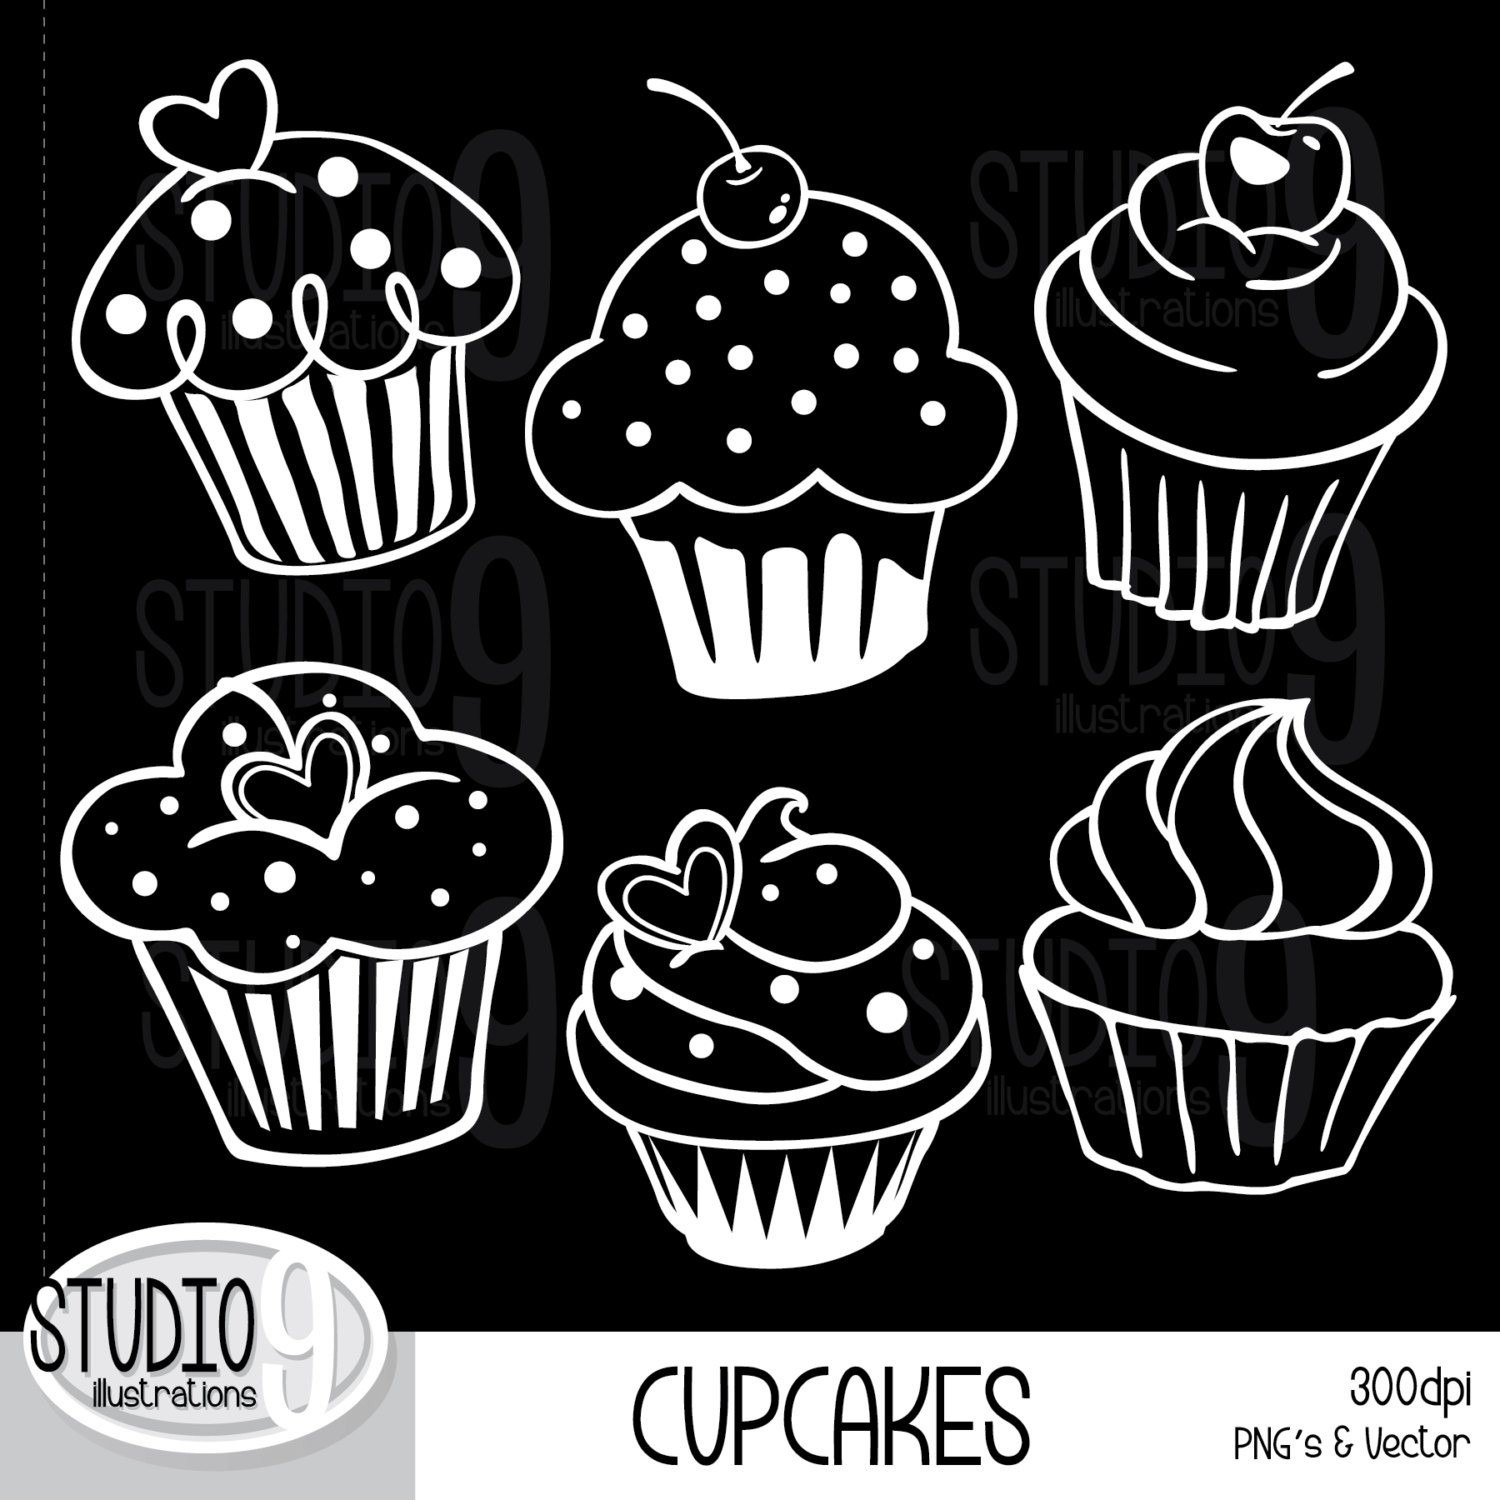 Cupcakes Clipart White Outline Chalk By Studio9illustrations